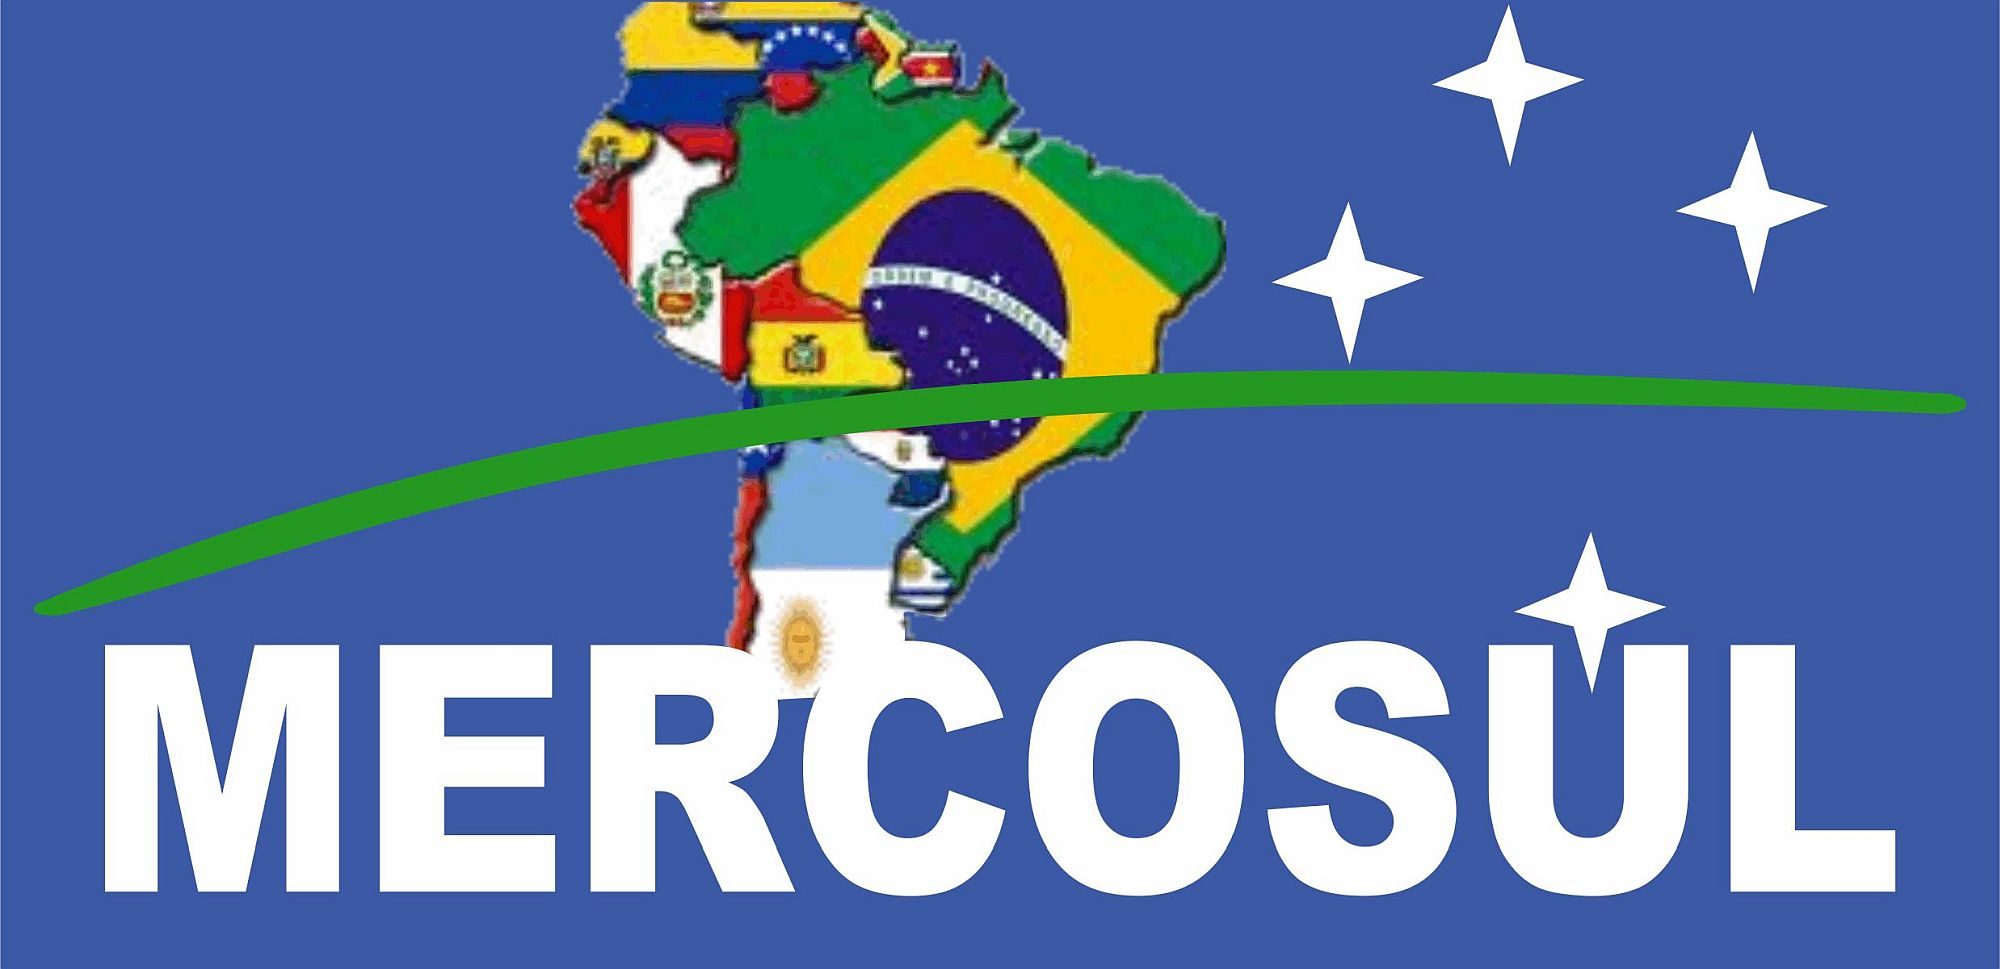 The Mercosur countries: Brazil, Argentina, Uruguay, Paraguay